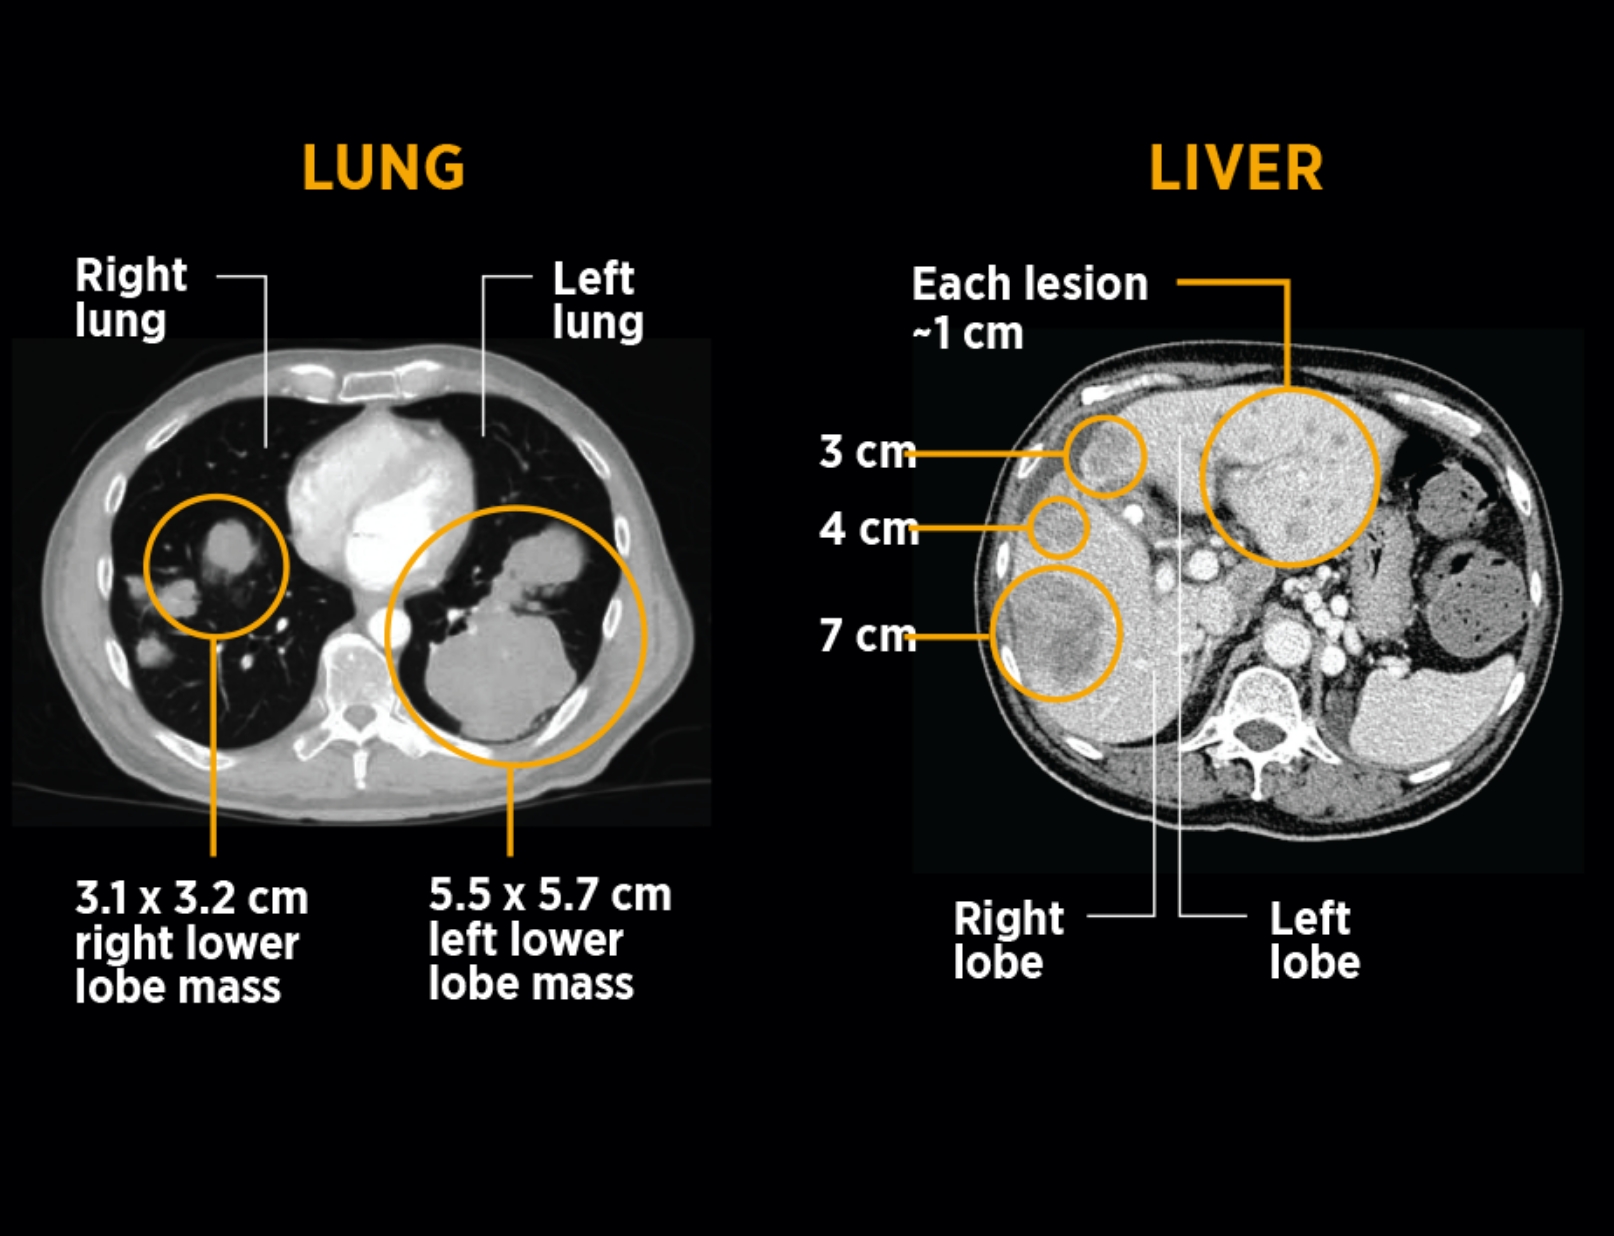 Right and left sides of lung and liver